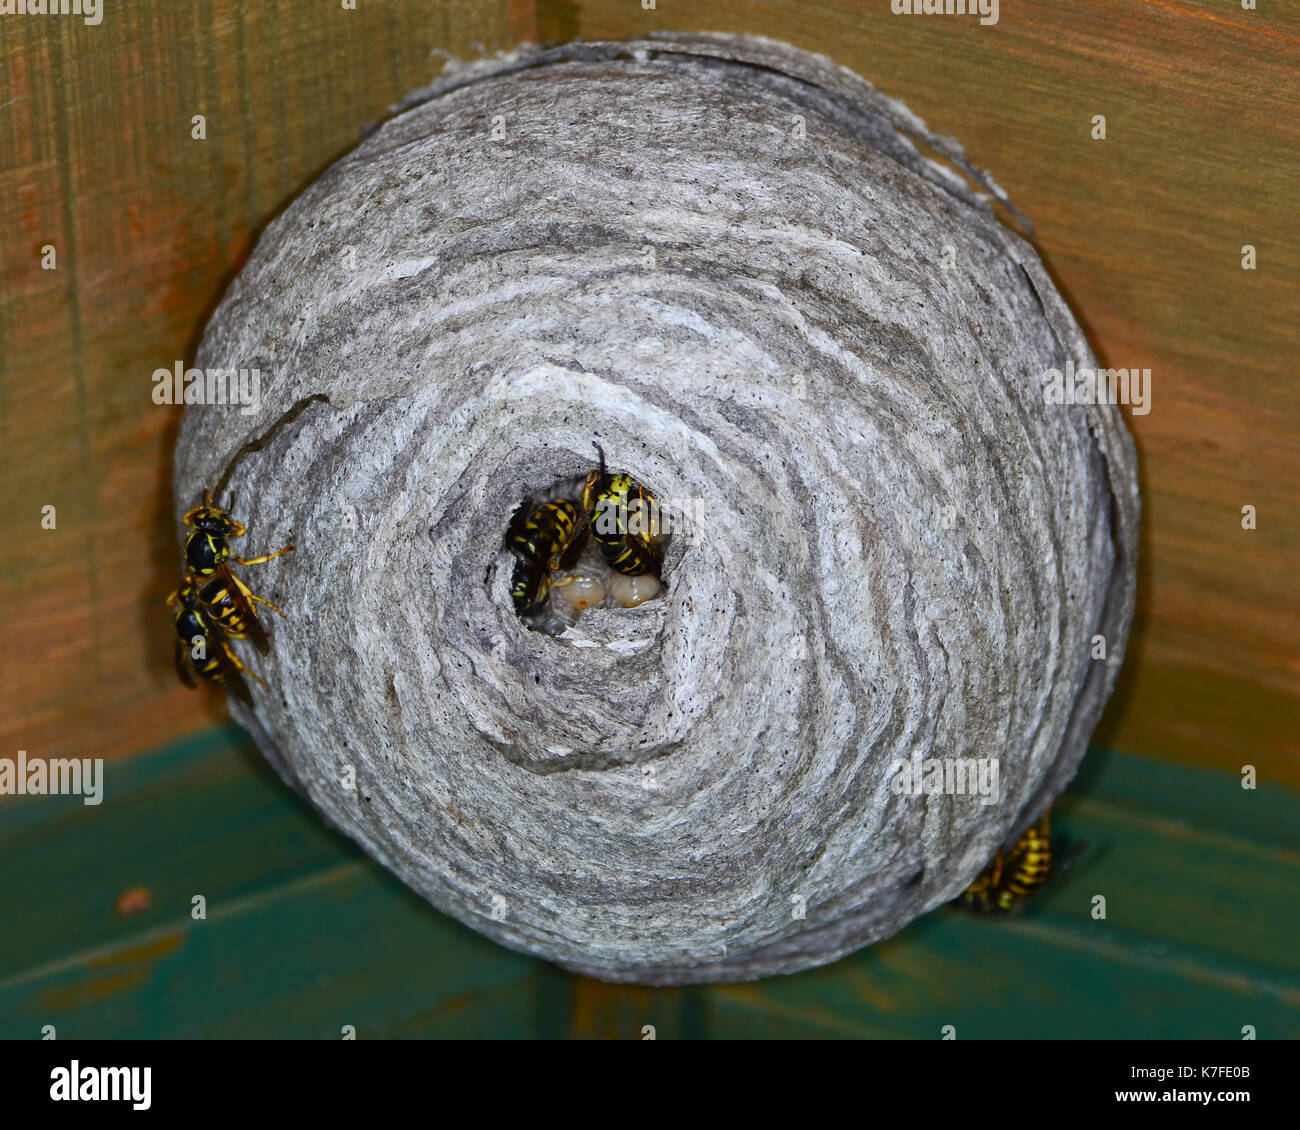 Closeup of a paper wasp nest with wasps and larva hanging from the eves of a garage in Speculator, New York USA Stock Photo